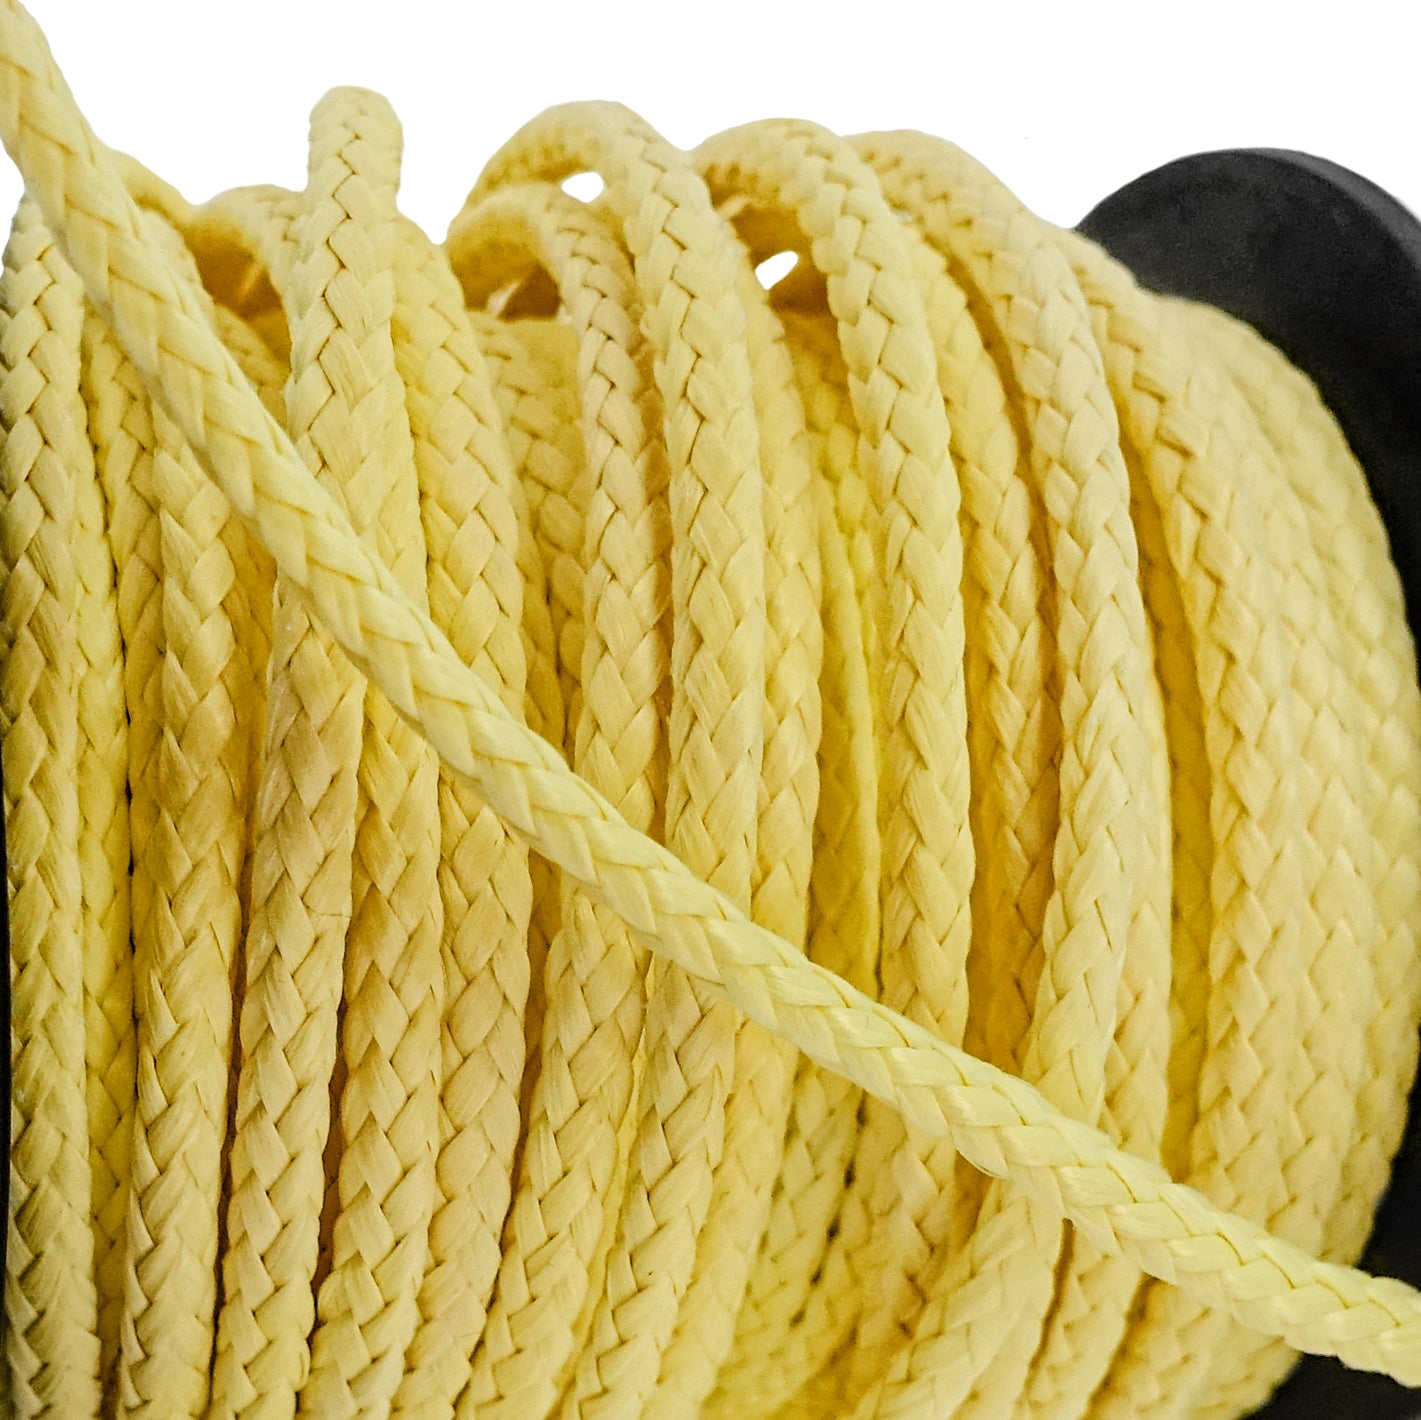 Kevlar Rope 3/8 inch 10mm Braided to buy per ft In stock✓